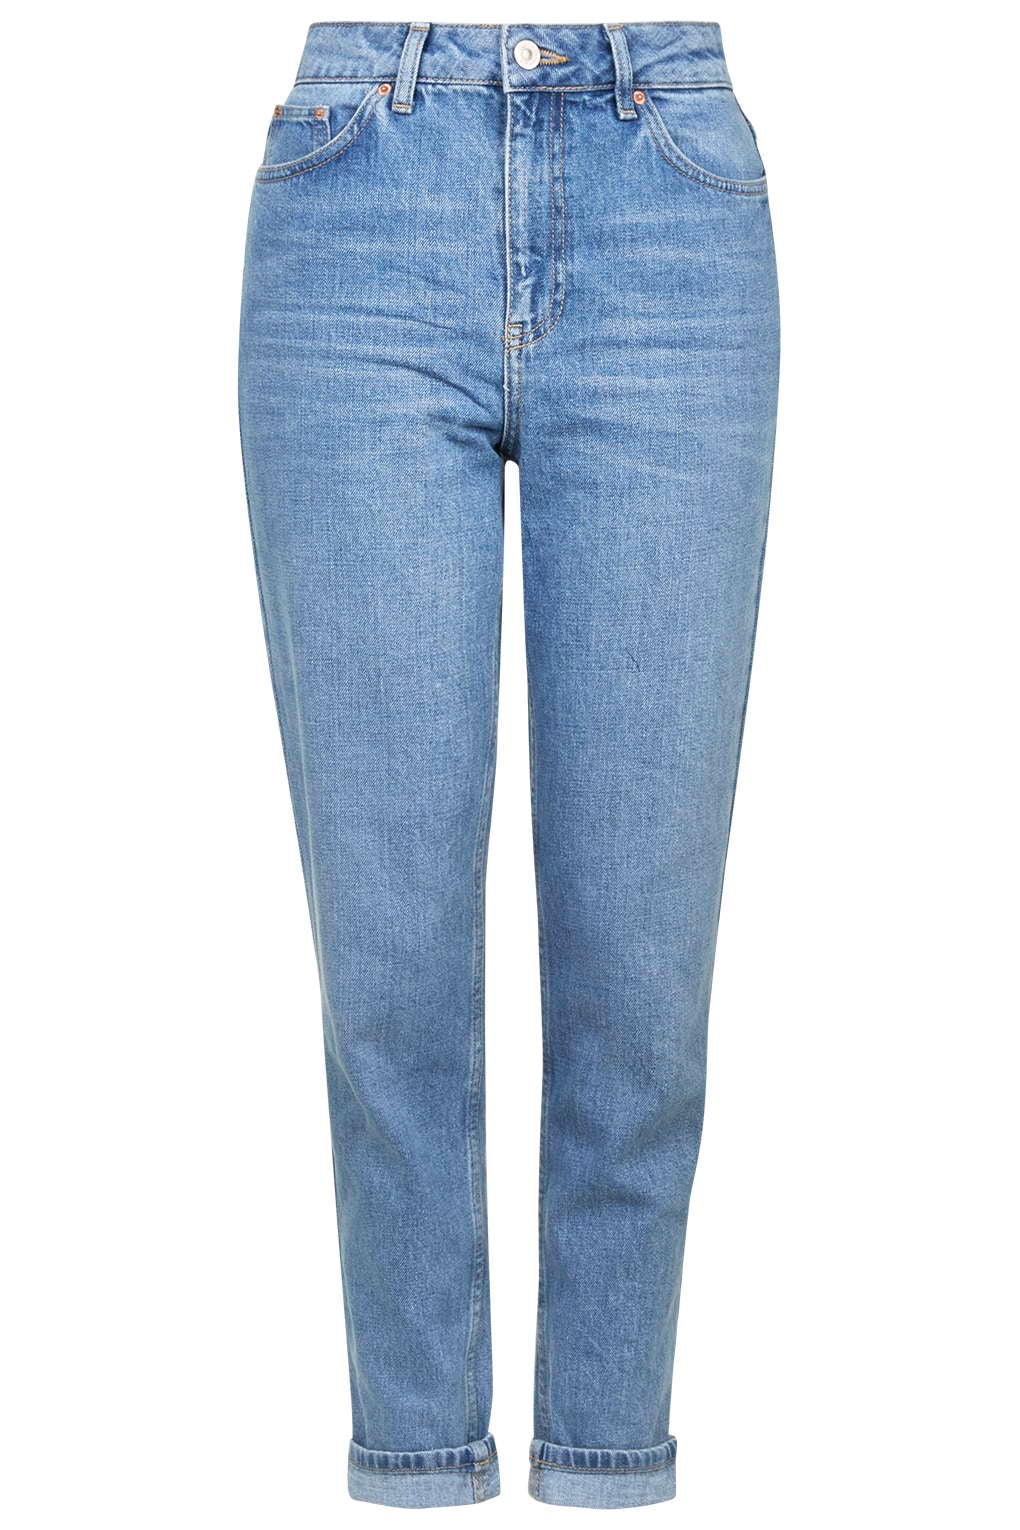 The Most Flattering Jeans for Your Body Type | Essence